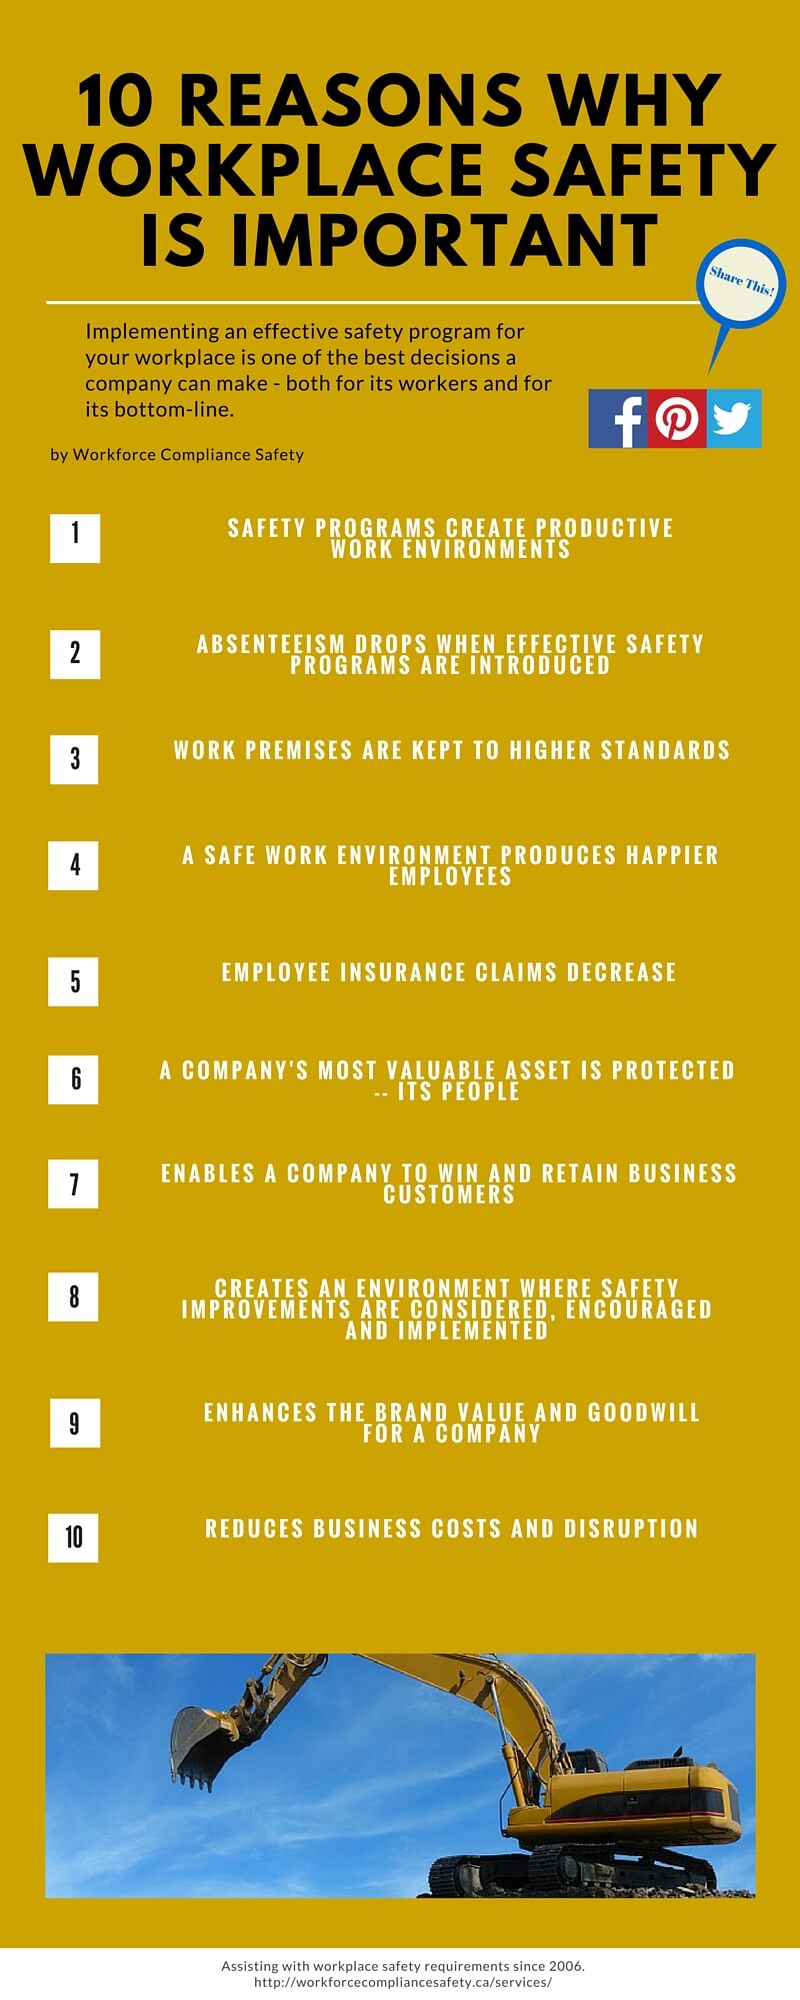 Why is workplace safety so important?